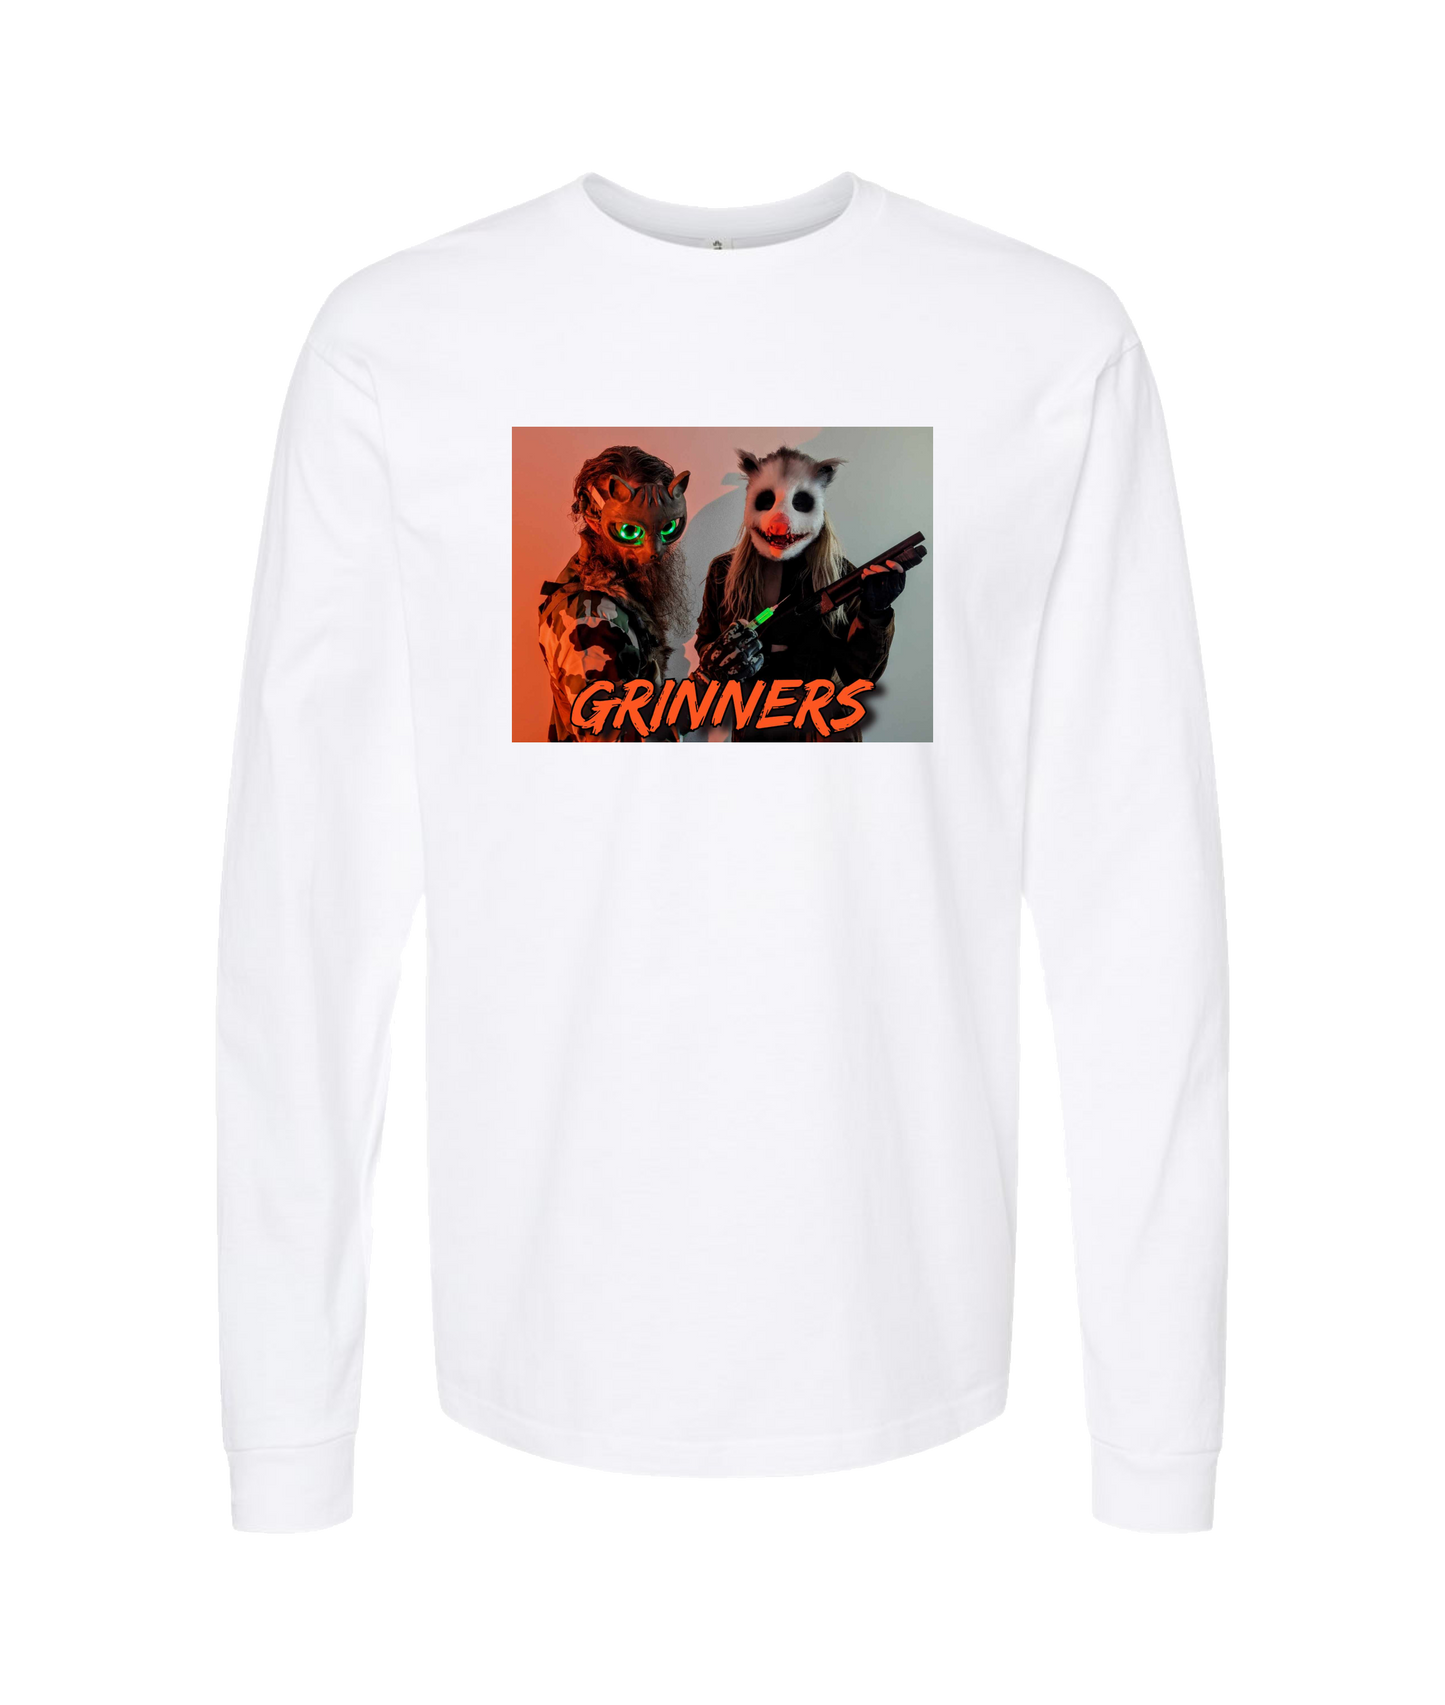 Refinery Films - GRINNERS GARB 01-2 - White Long Sleeve T